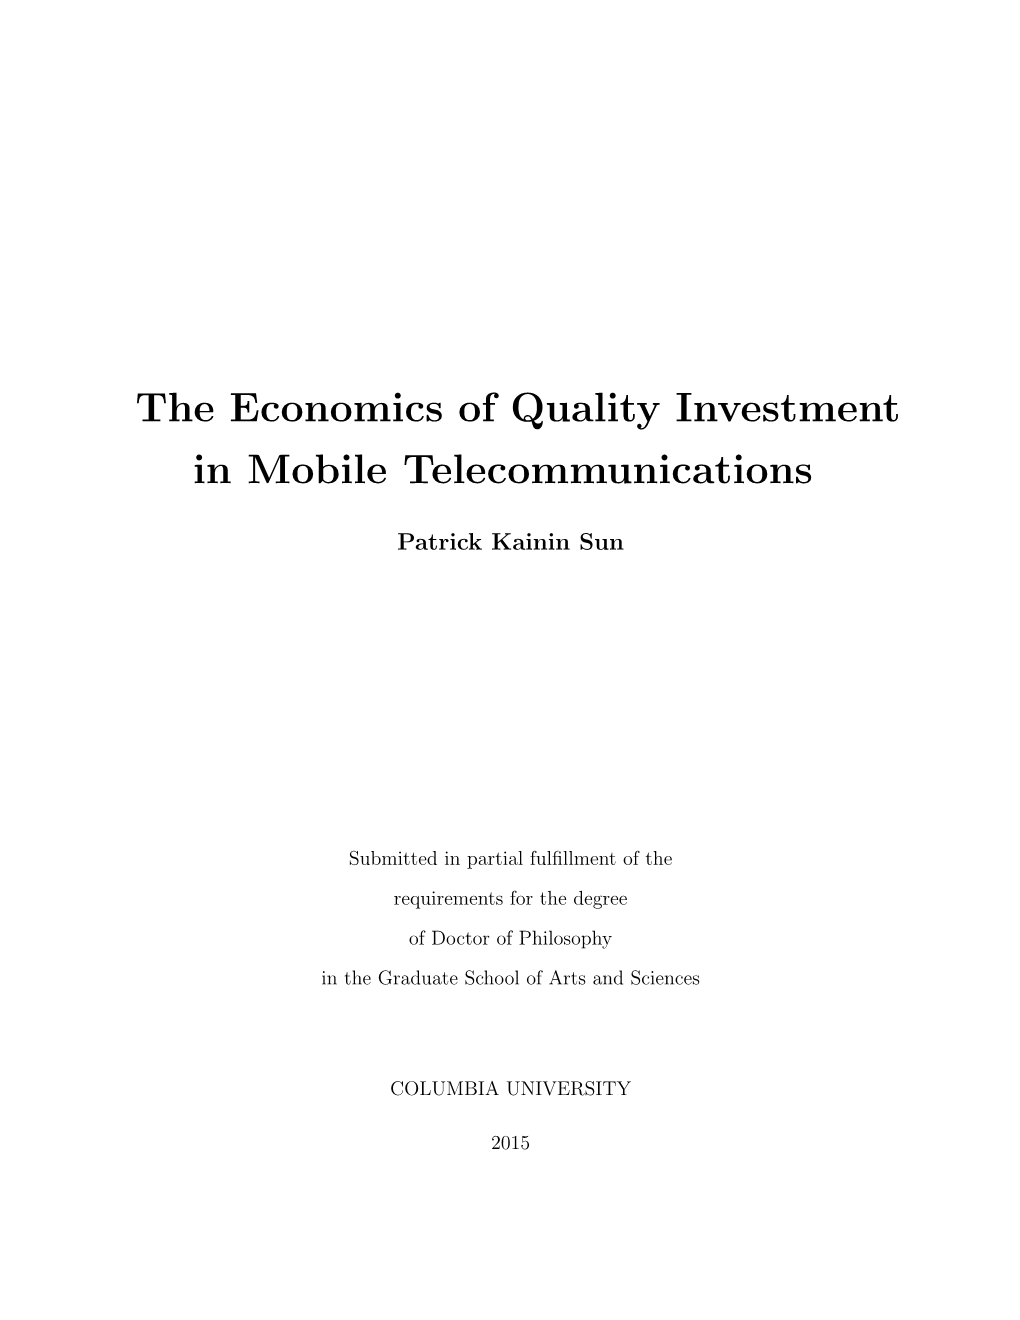 The Economics of Quality Investment in Mobile Telecommunications